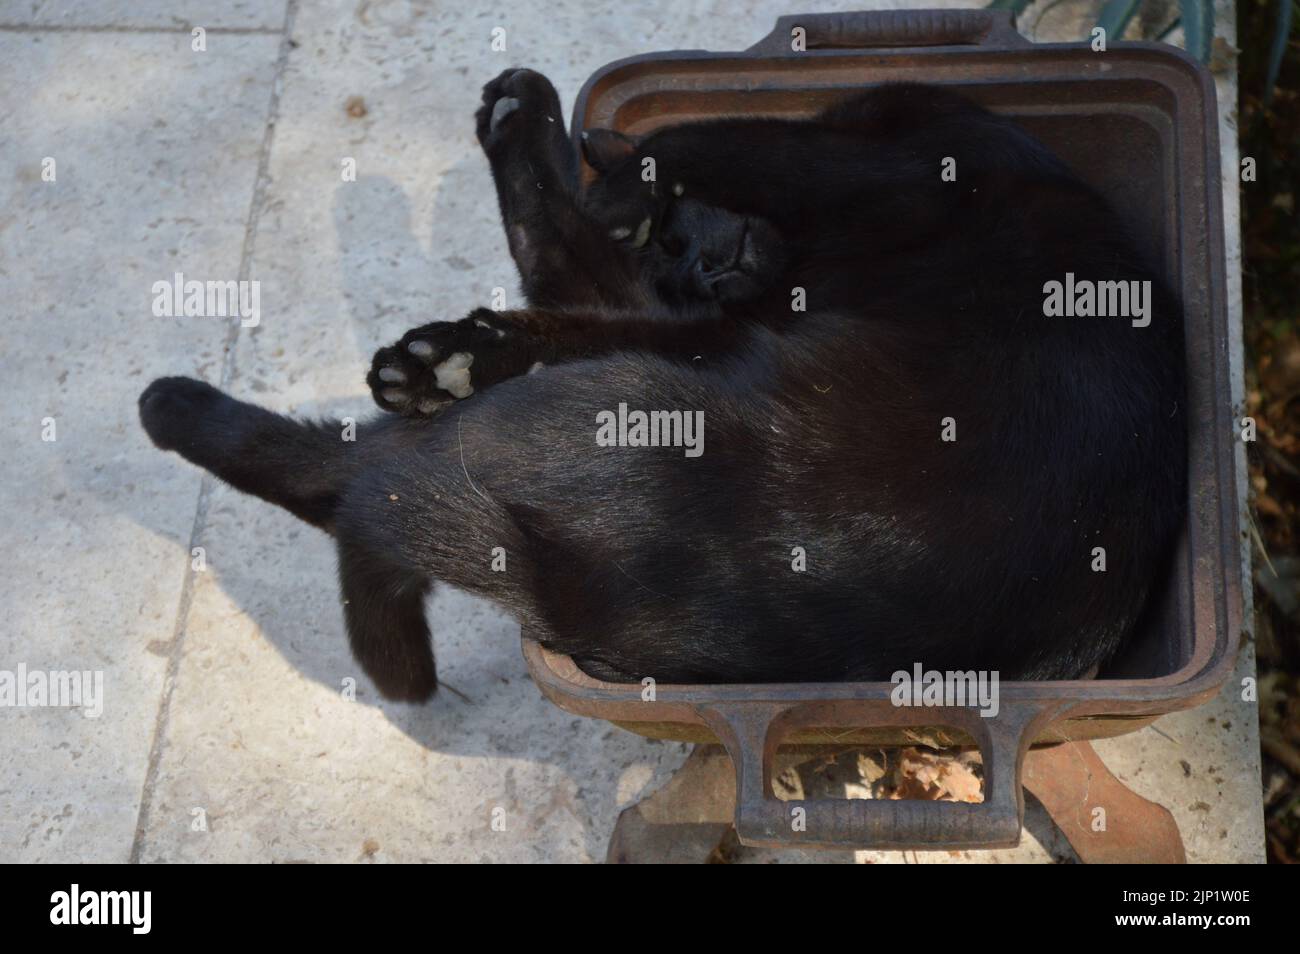 A cat take a rest outside in a  metal shell Stock Photo